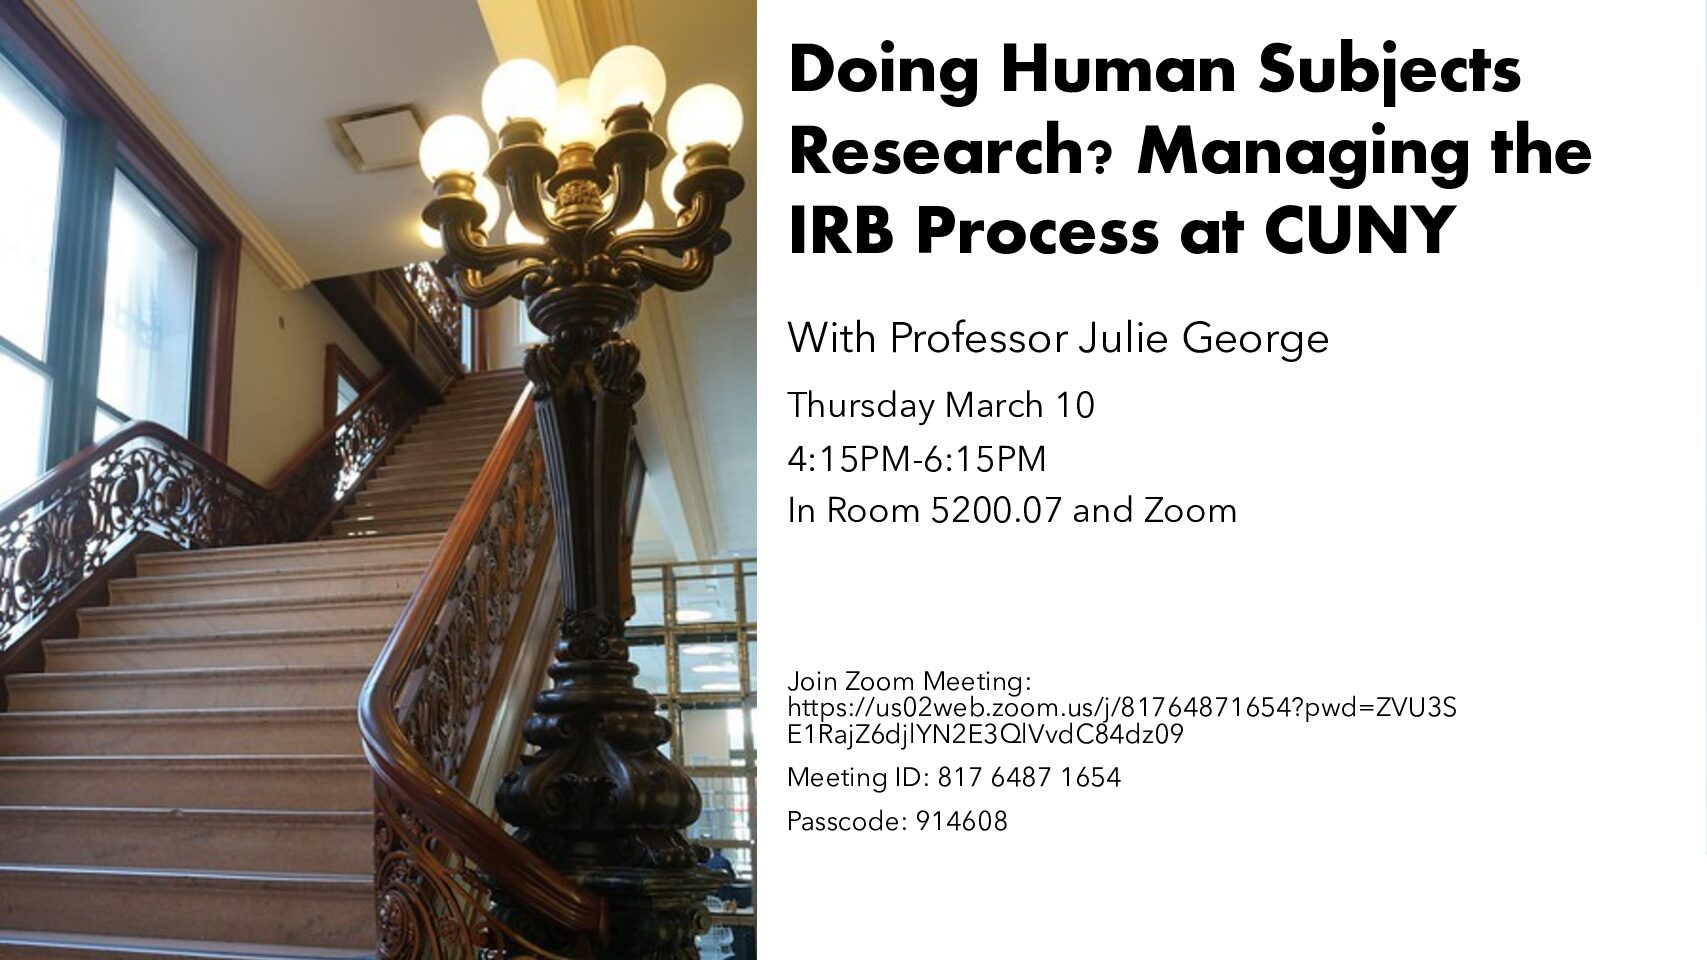 Professional Development Workshop: "Doing Human Subjects Research? Managing the IRB Process" with Prof. Julie George, Thursday, March 10, 4:15–6:15PM